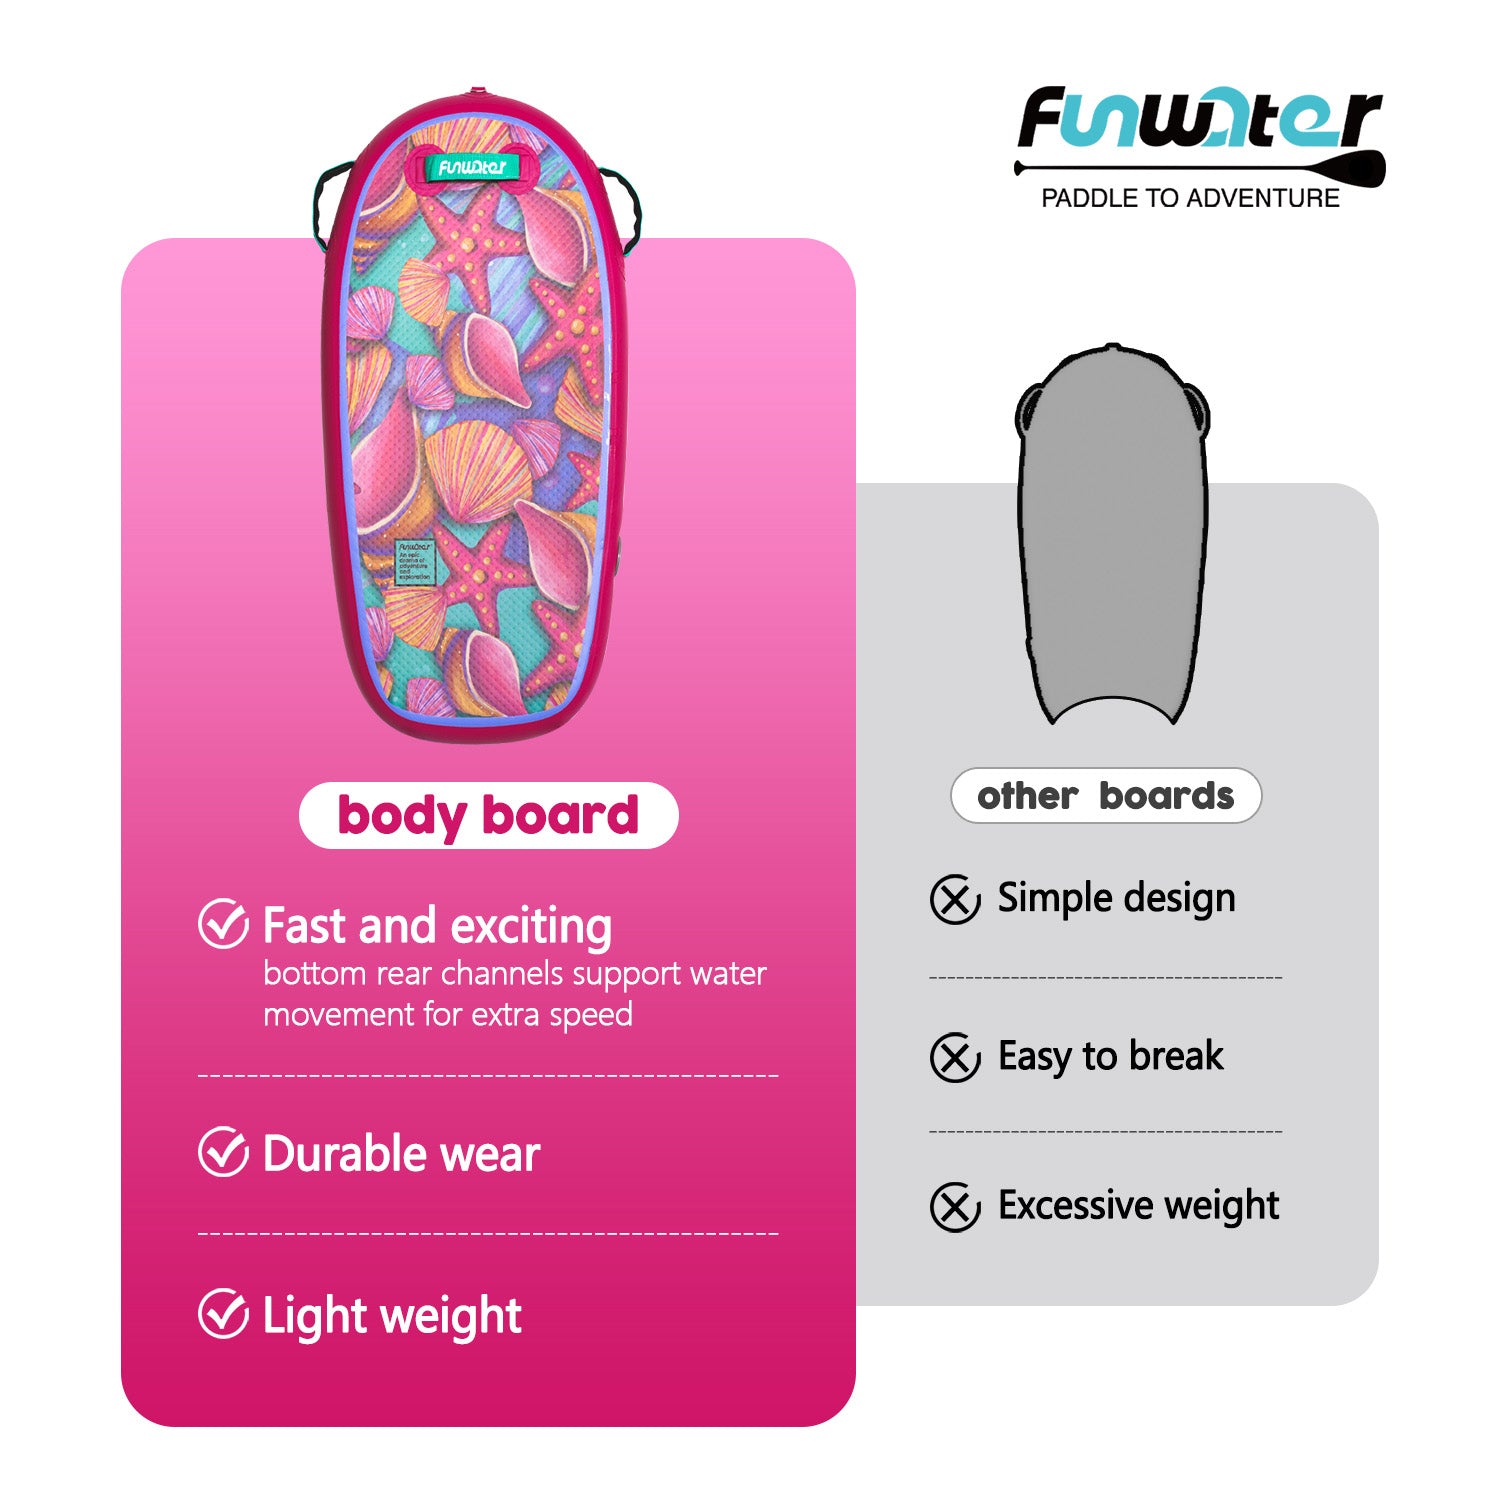 Funwater bodyboard has many advantages comparing with other boards, like lightweight, durable and fast